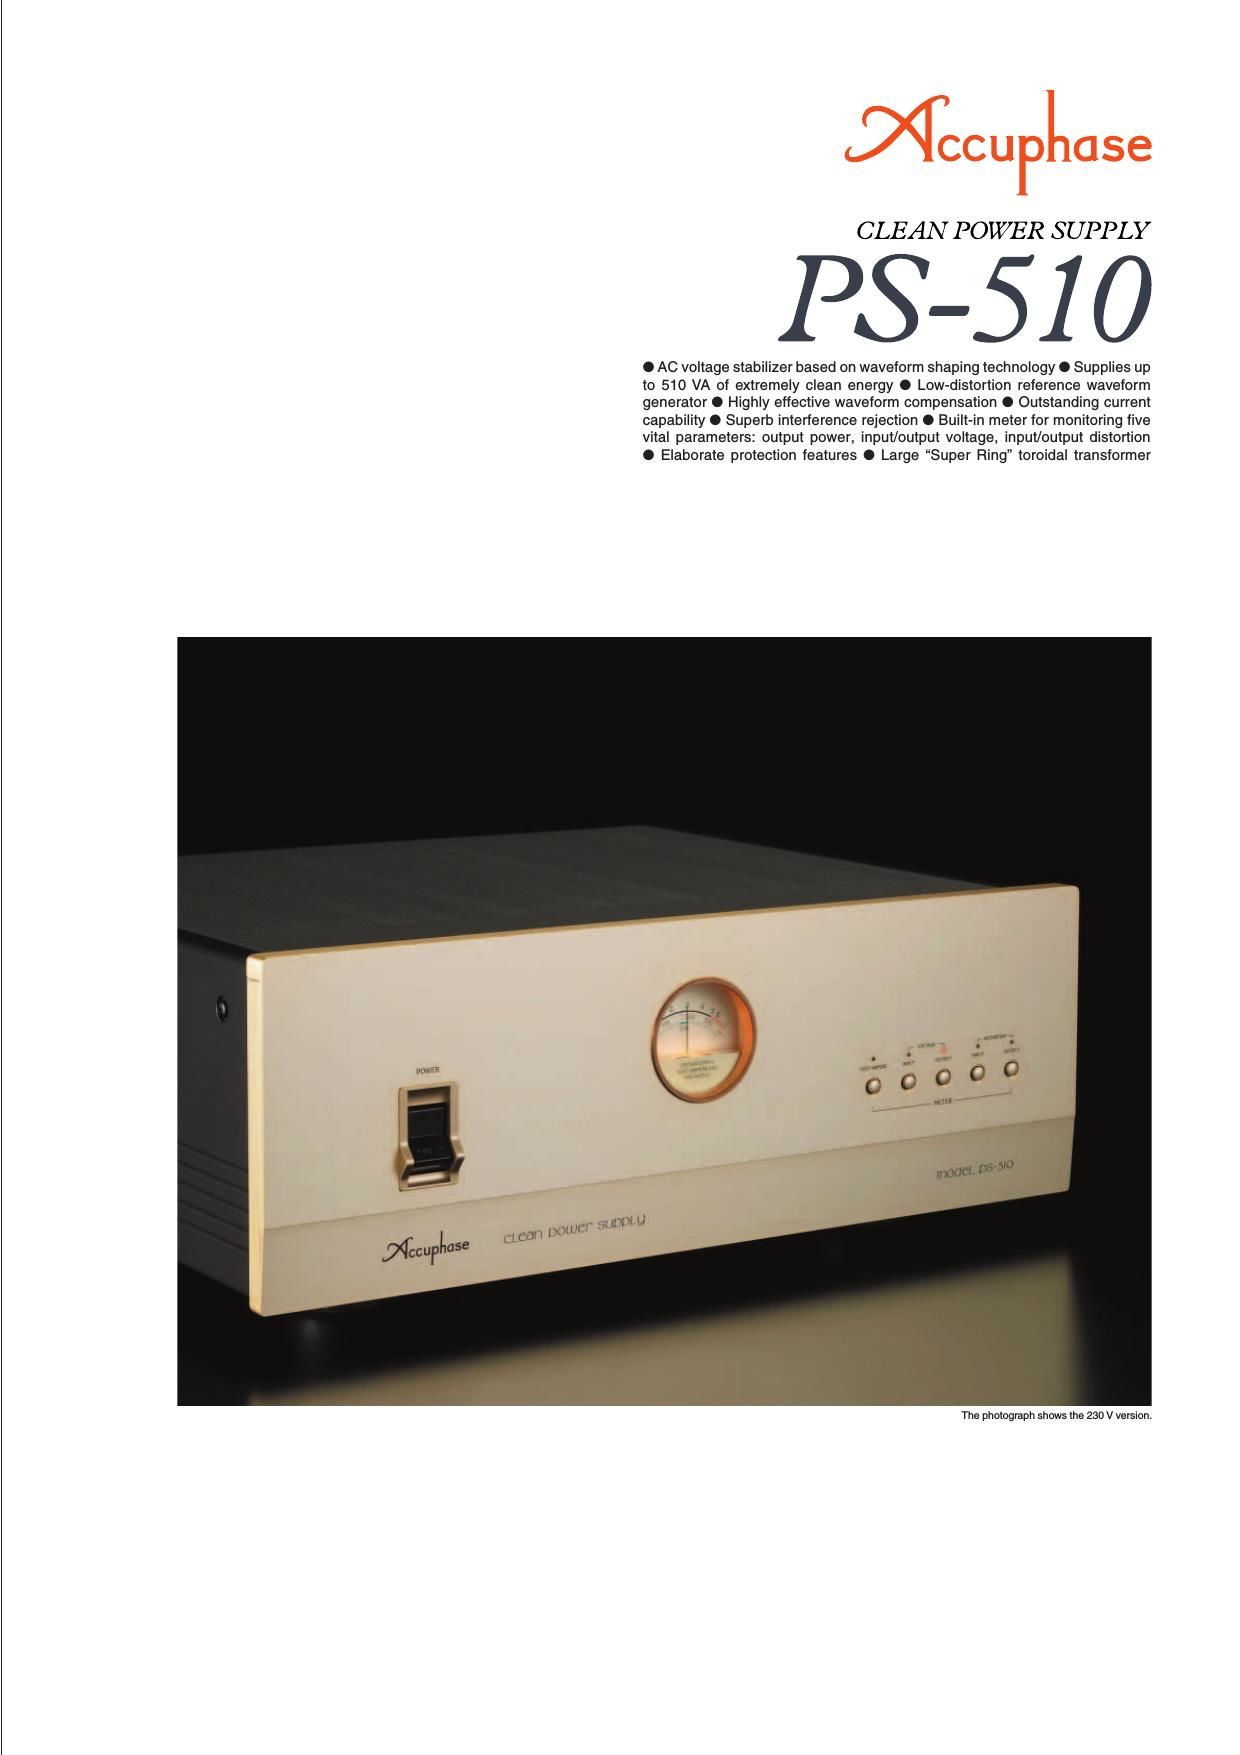 Accuphase PS 510 Brochure